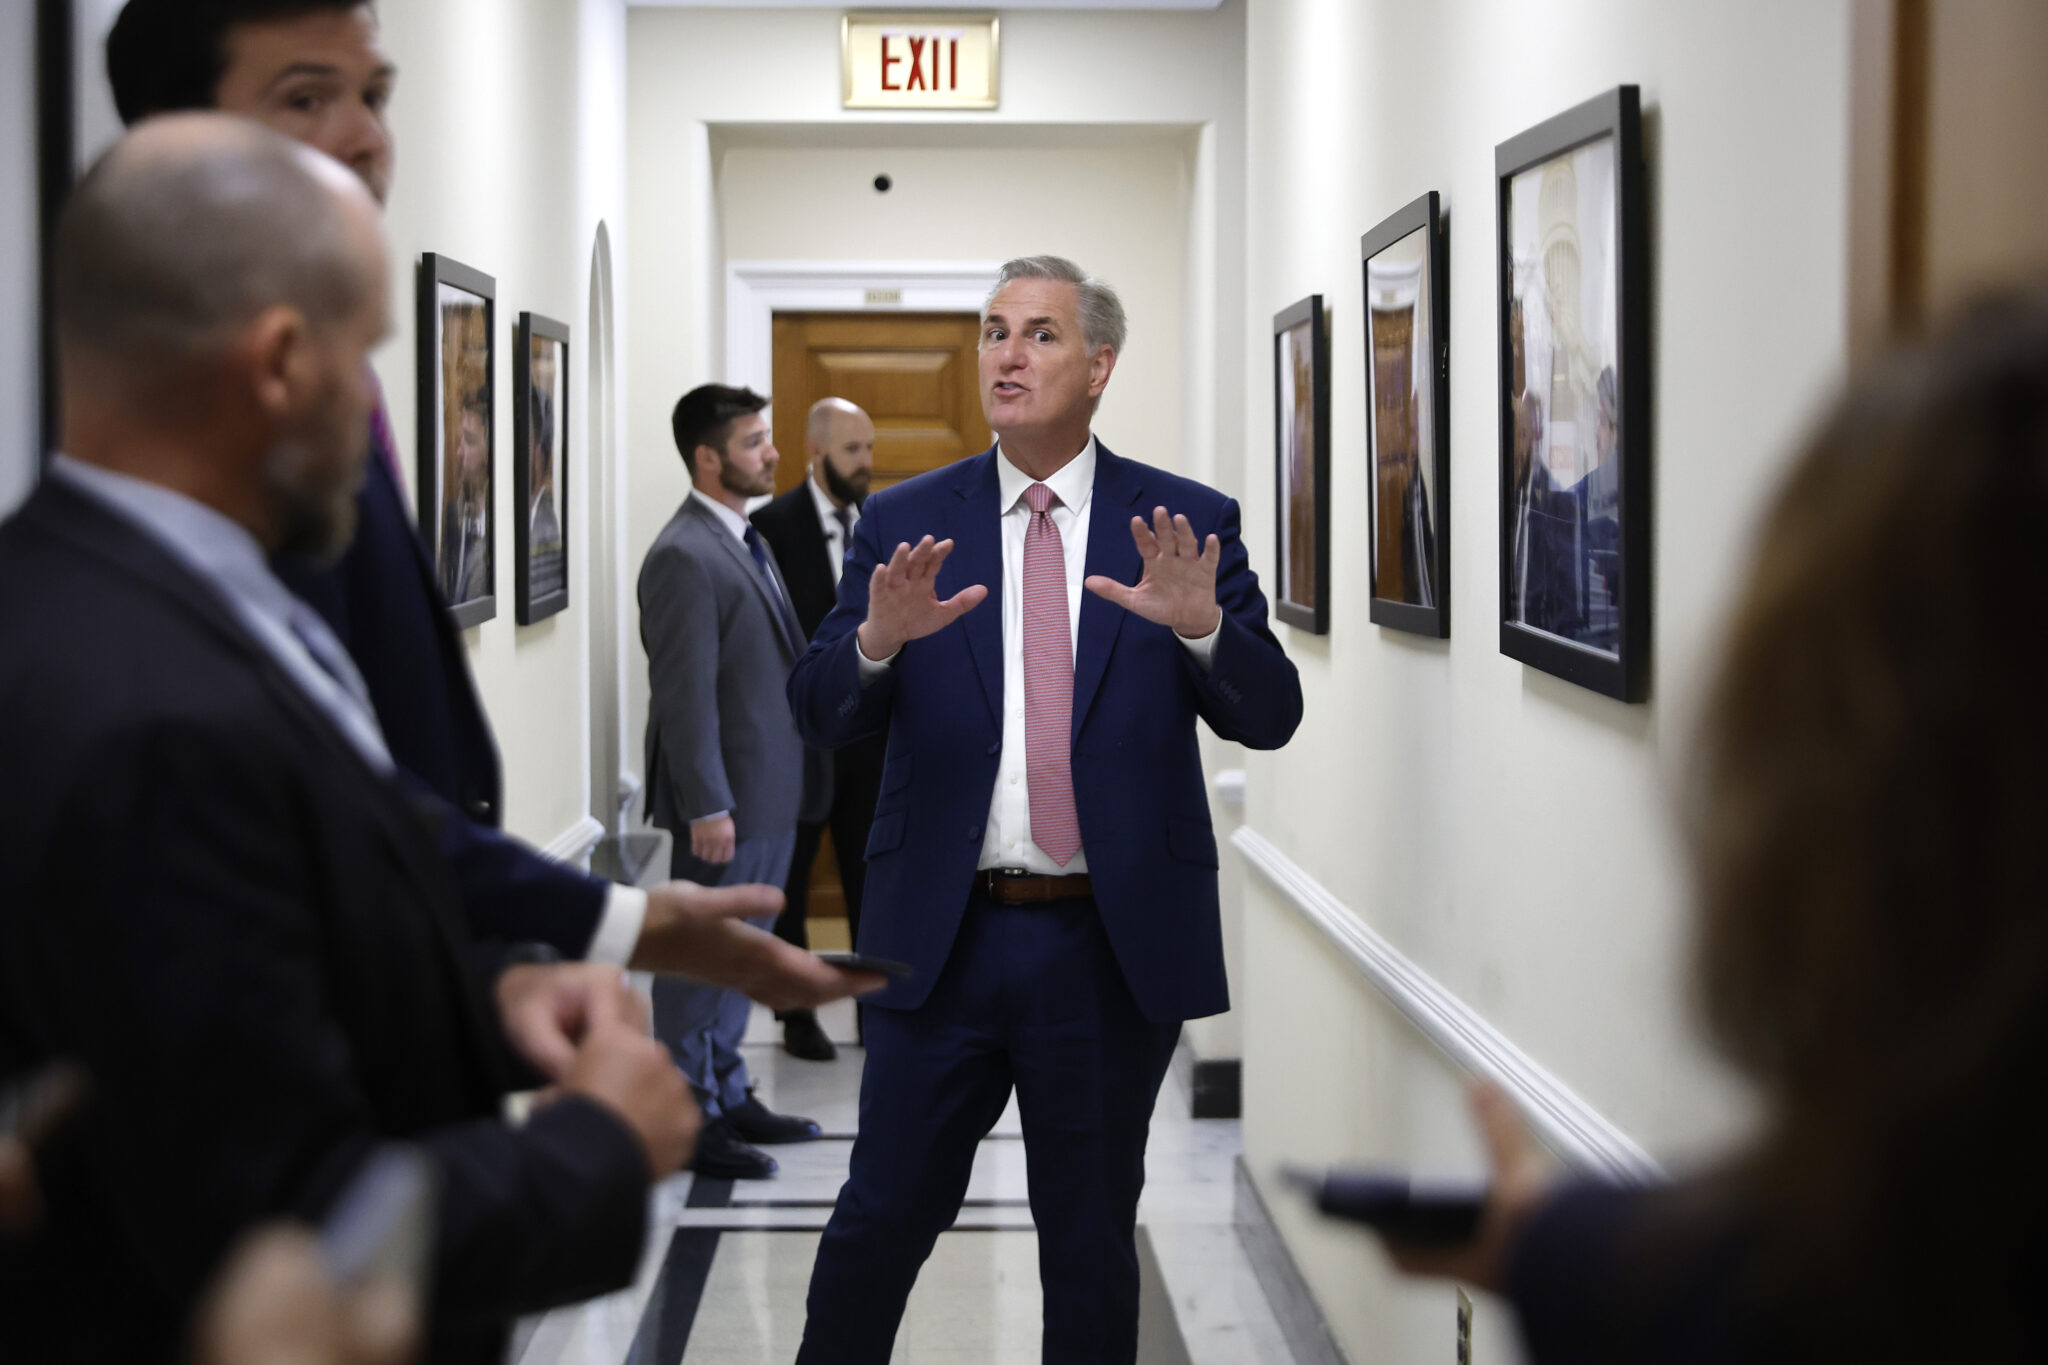 WASHINGTON, DC - AUGUST 12: House Minority Leader Kevin McCarthy (R-CA) talks to reporters after attending the swearing-in of  Rep. Brad Finstad (R-MN) at the U.S. Capitol on August 12, 2022 in Washington, DC. Finstad won a special election in Minnesota to replace former Rep. Jim Hagedorn (R-MN) who died in January of COVID-19. (Photo by Chip Somodevilla/Getty Images)